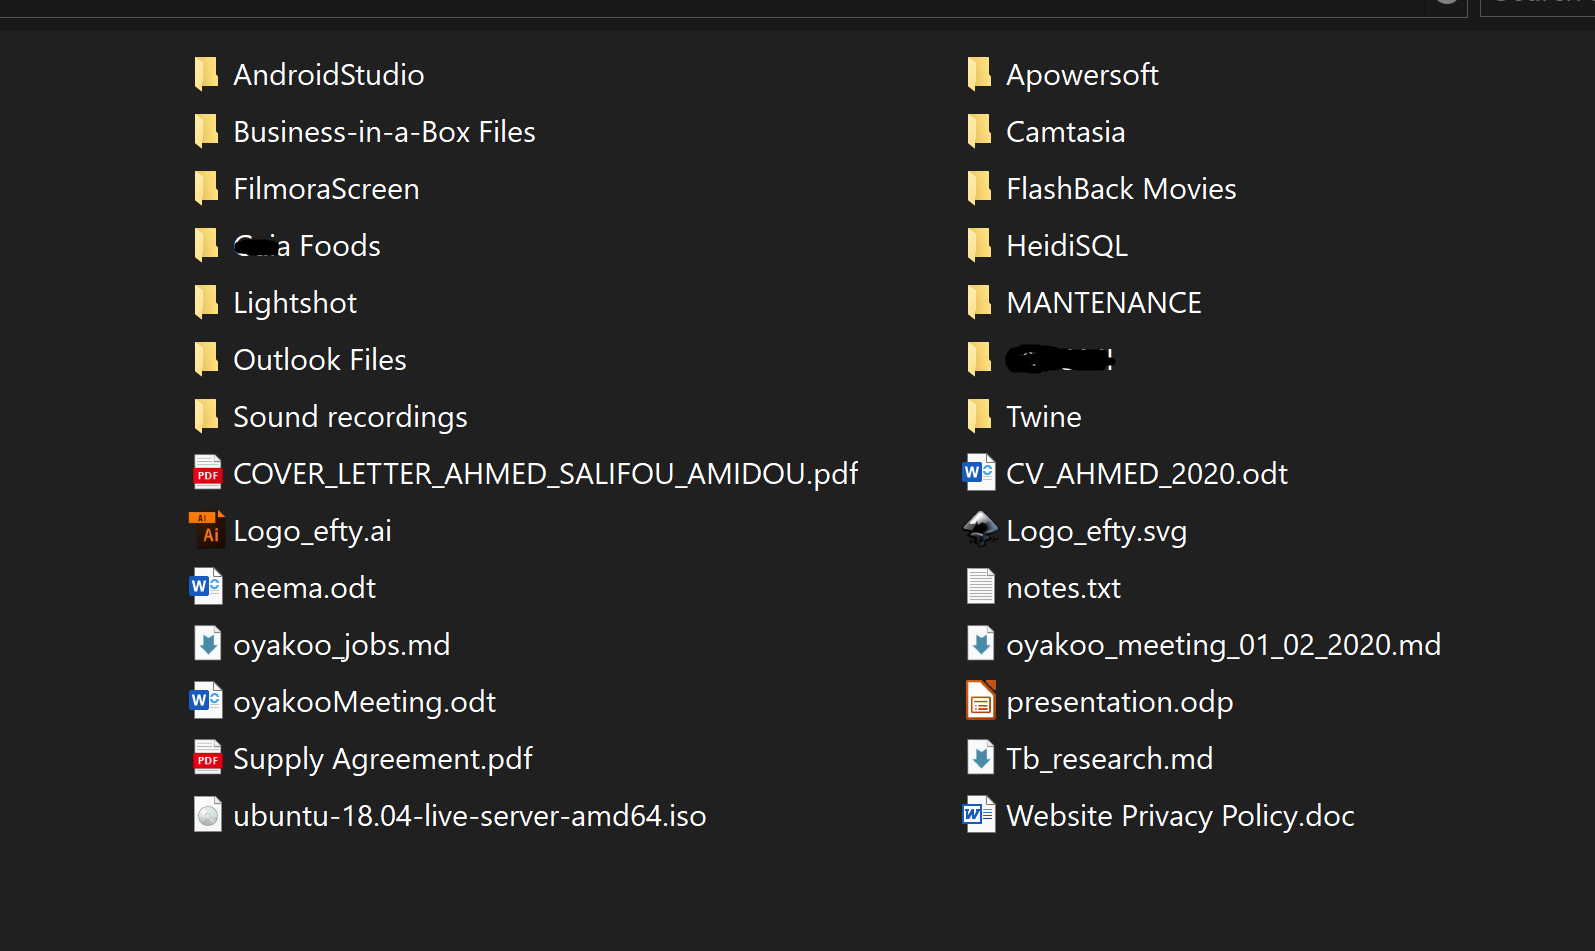 Folder and files